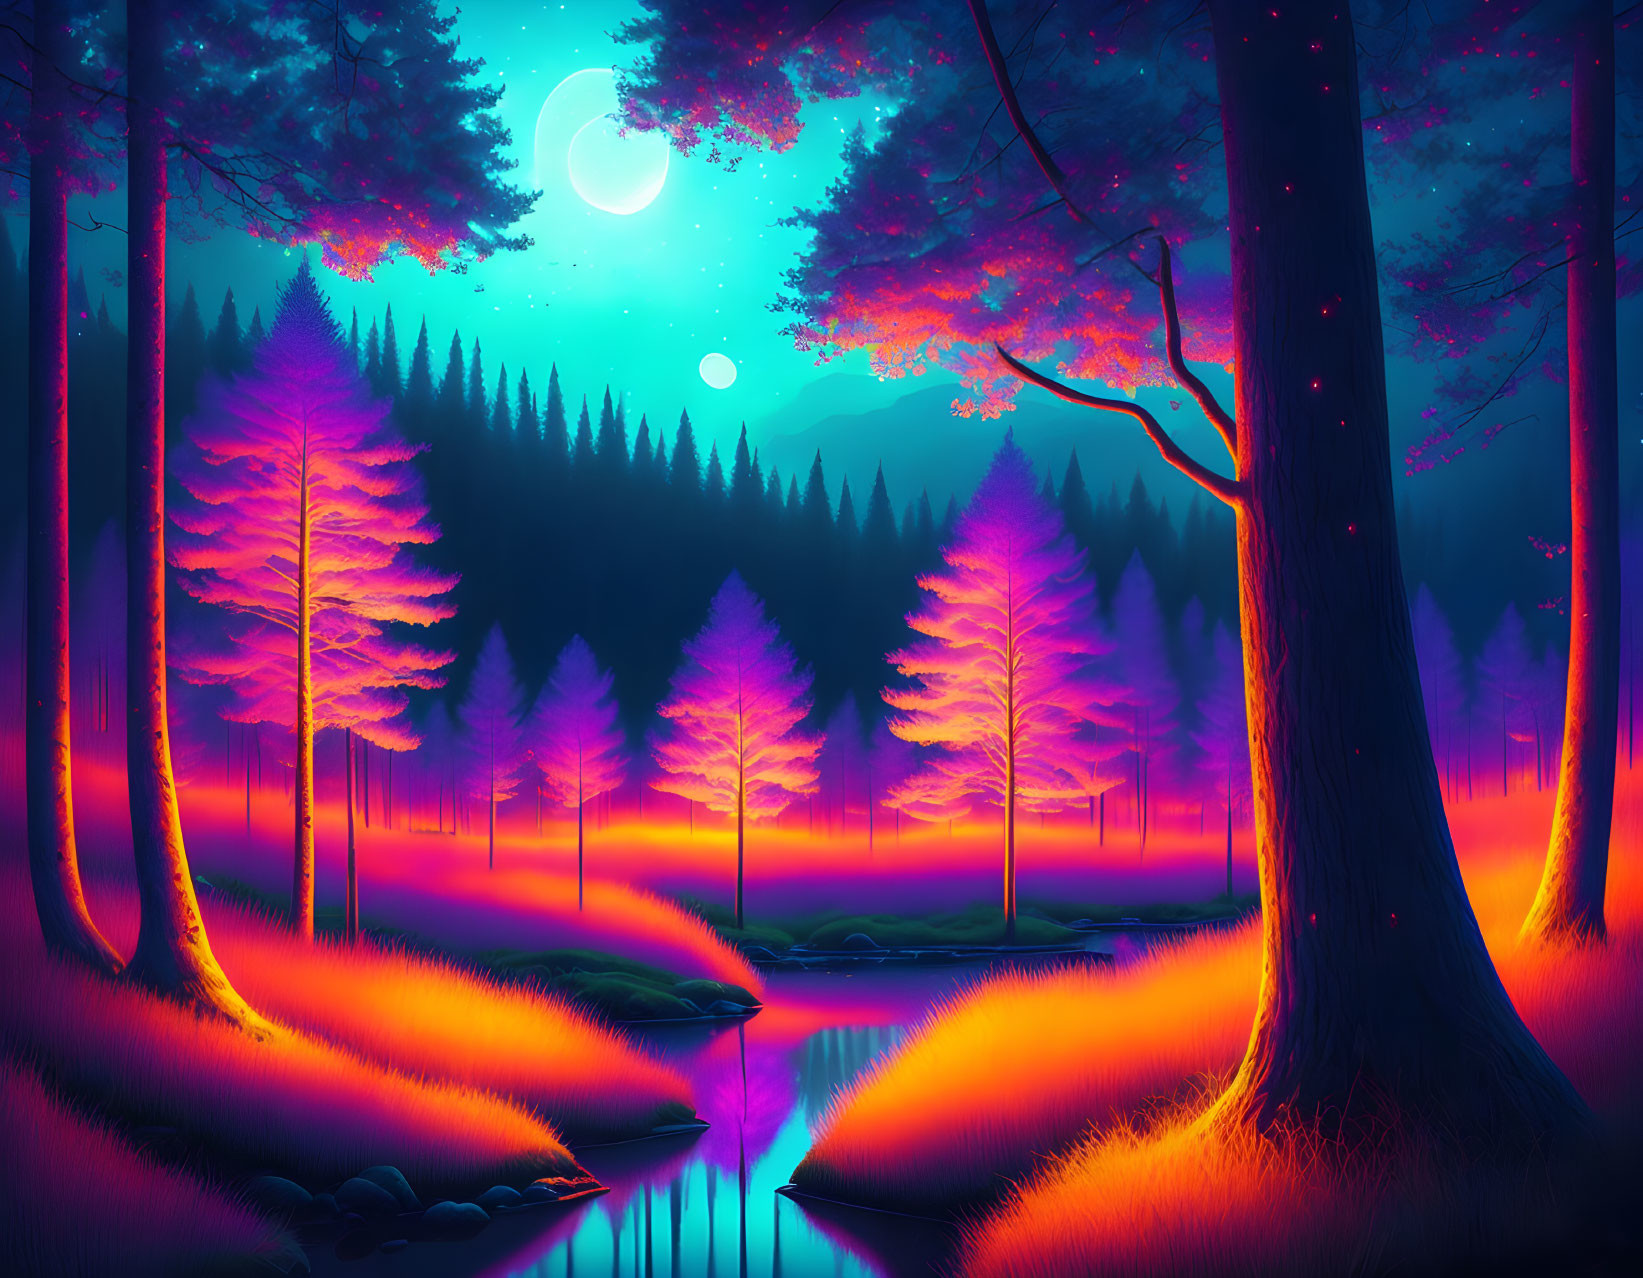 Fantastical forest scene at night with glowing trees and serene river